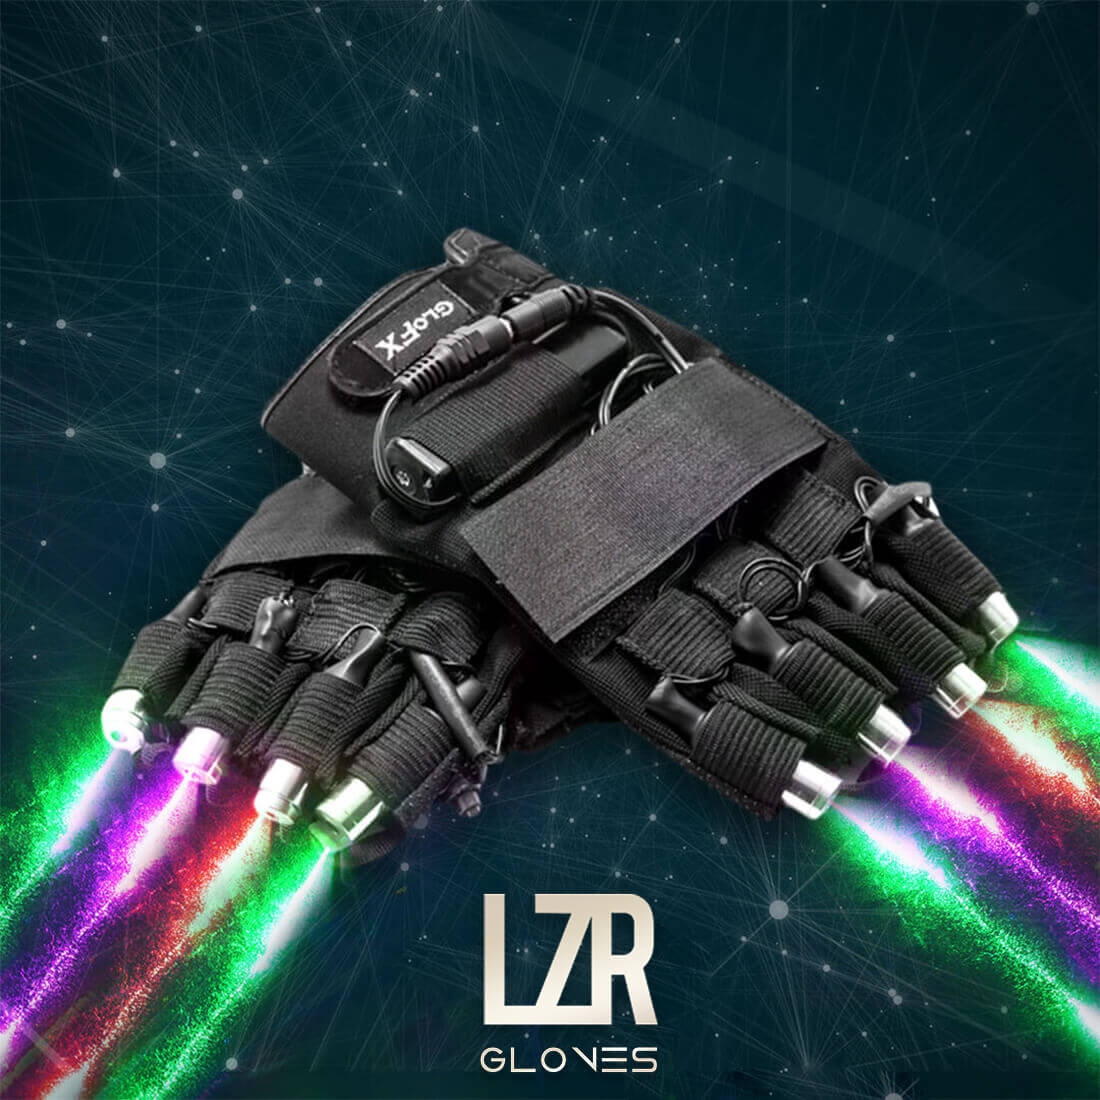 GloFX LZR Laser Gloves Multi-Color Fingers Lazers Battery Rechargeable Rave 